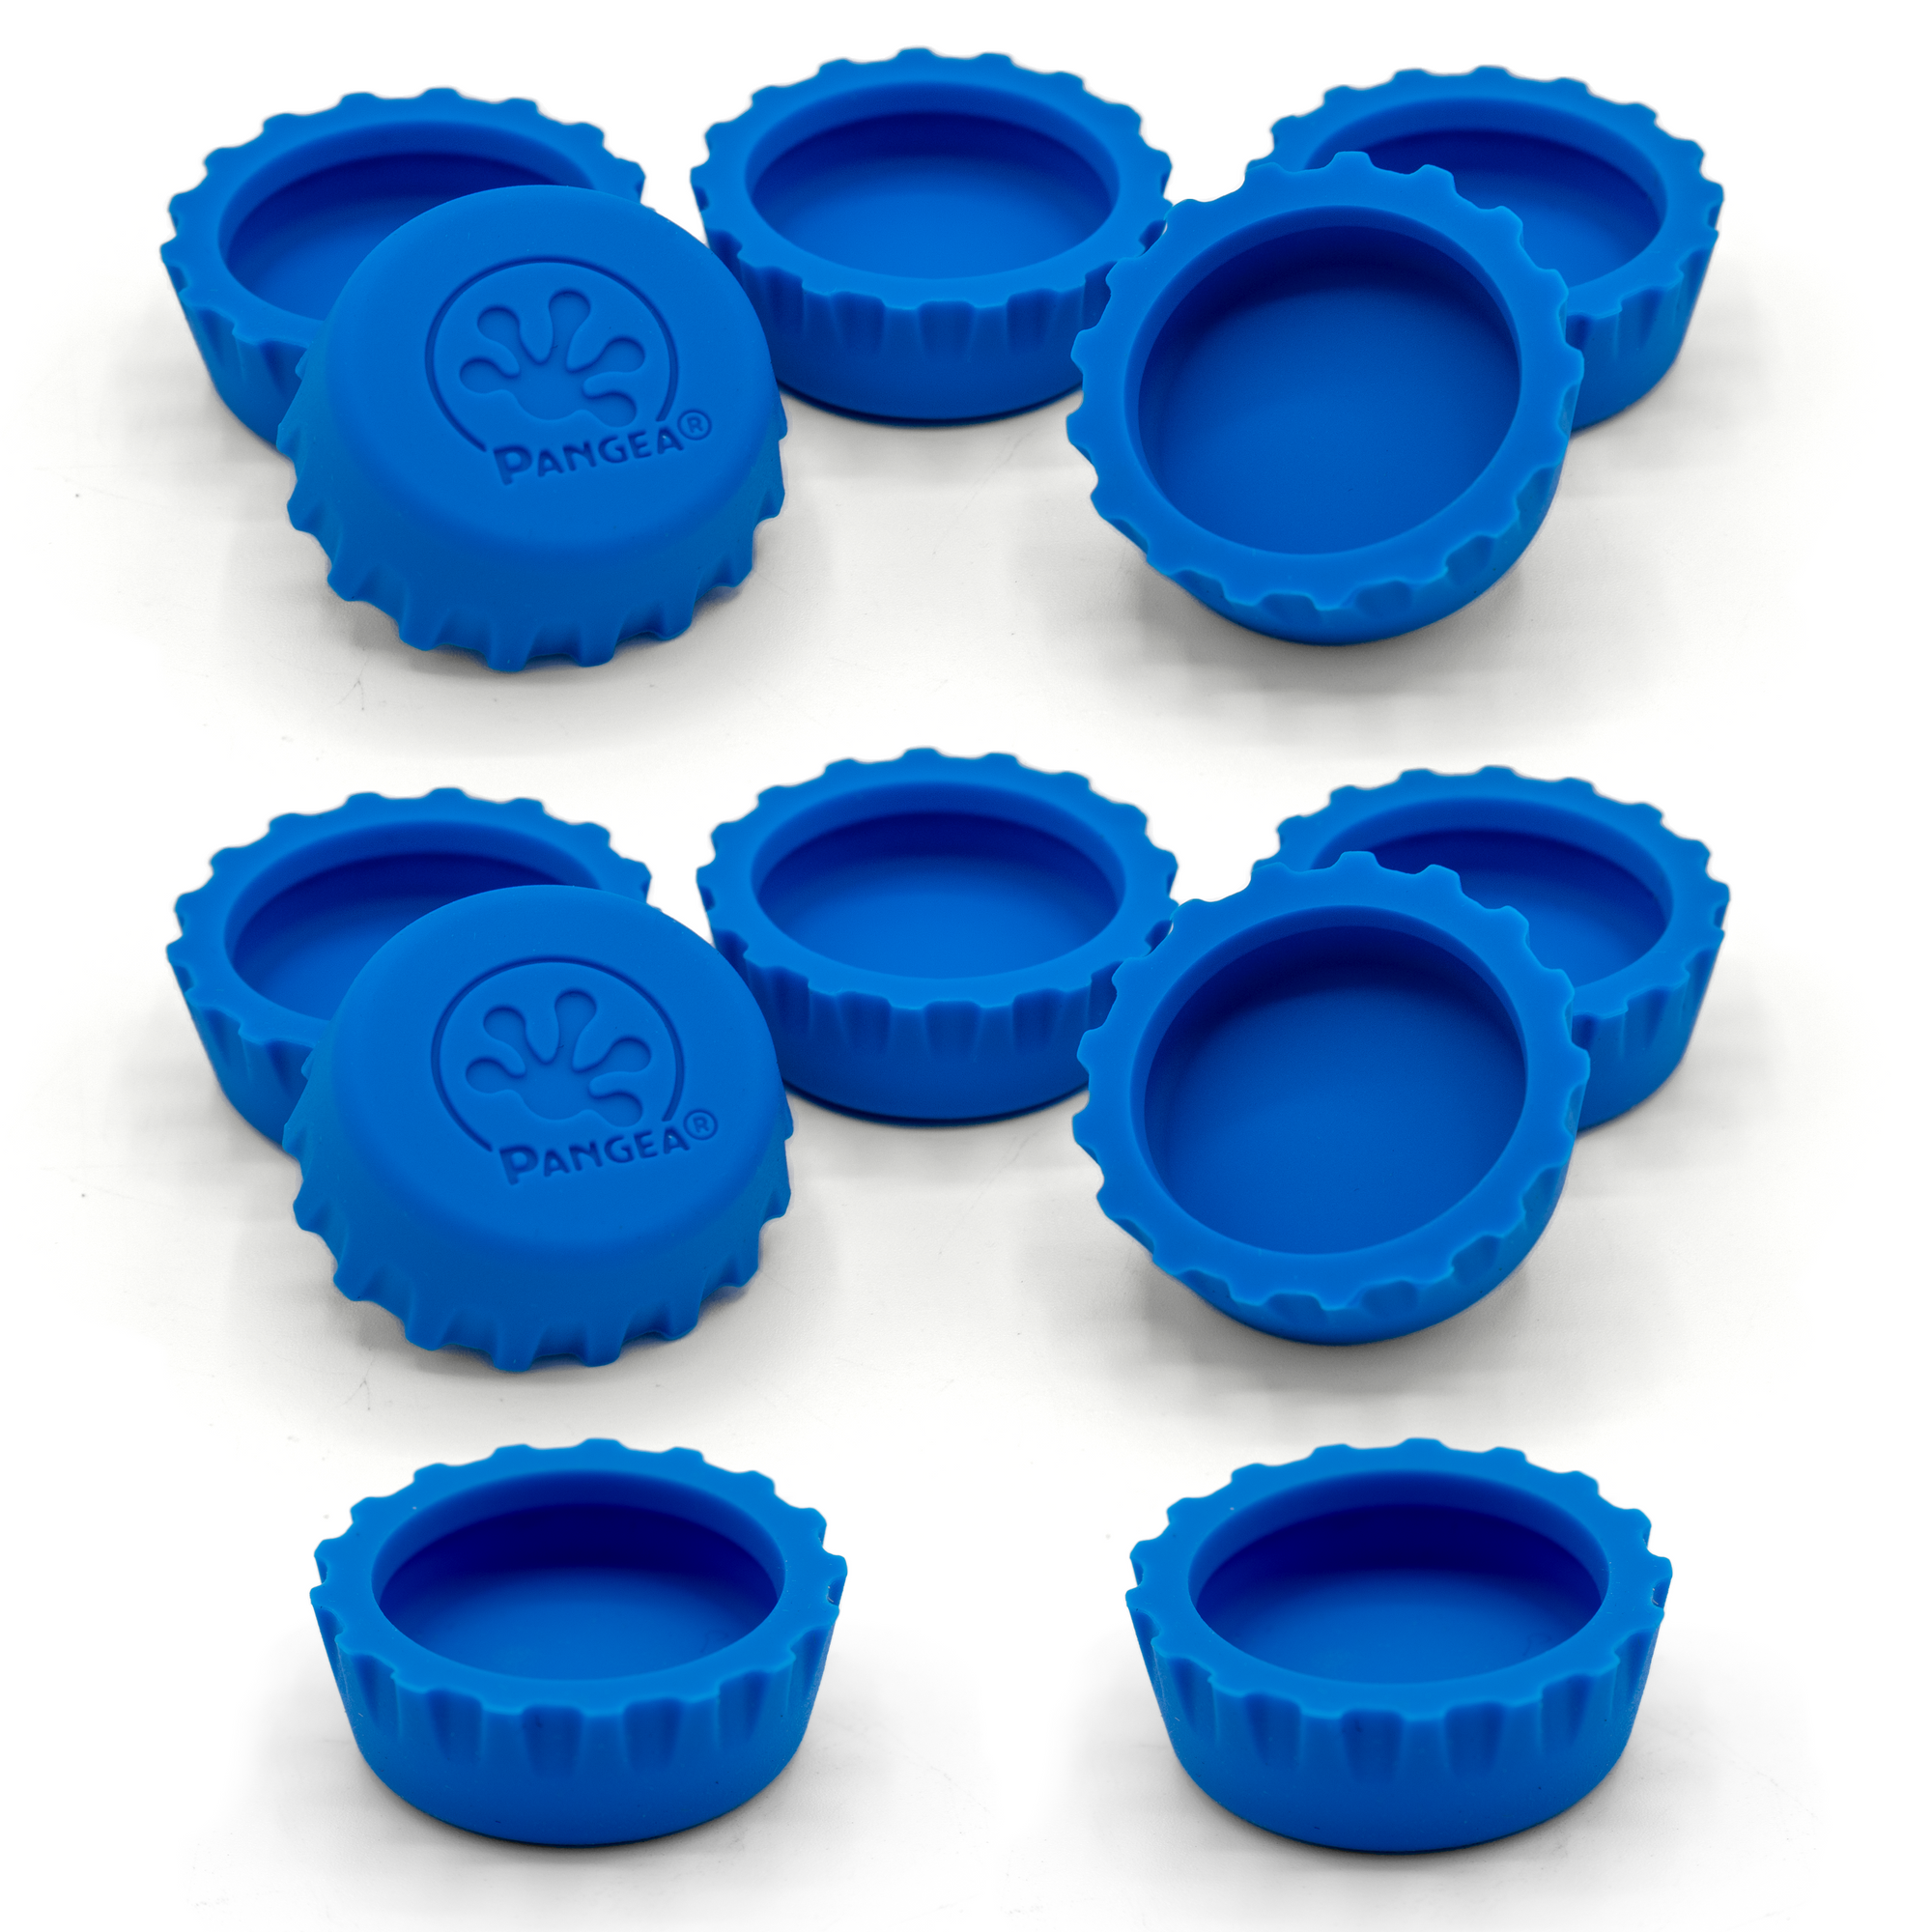 https://cdn.shopify.com/s/files/1/0089/8567/3828/products/12-PackSiliconeBottleCap-Blue_2000x.png?v=1666198667